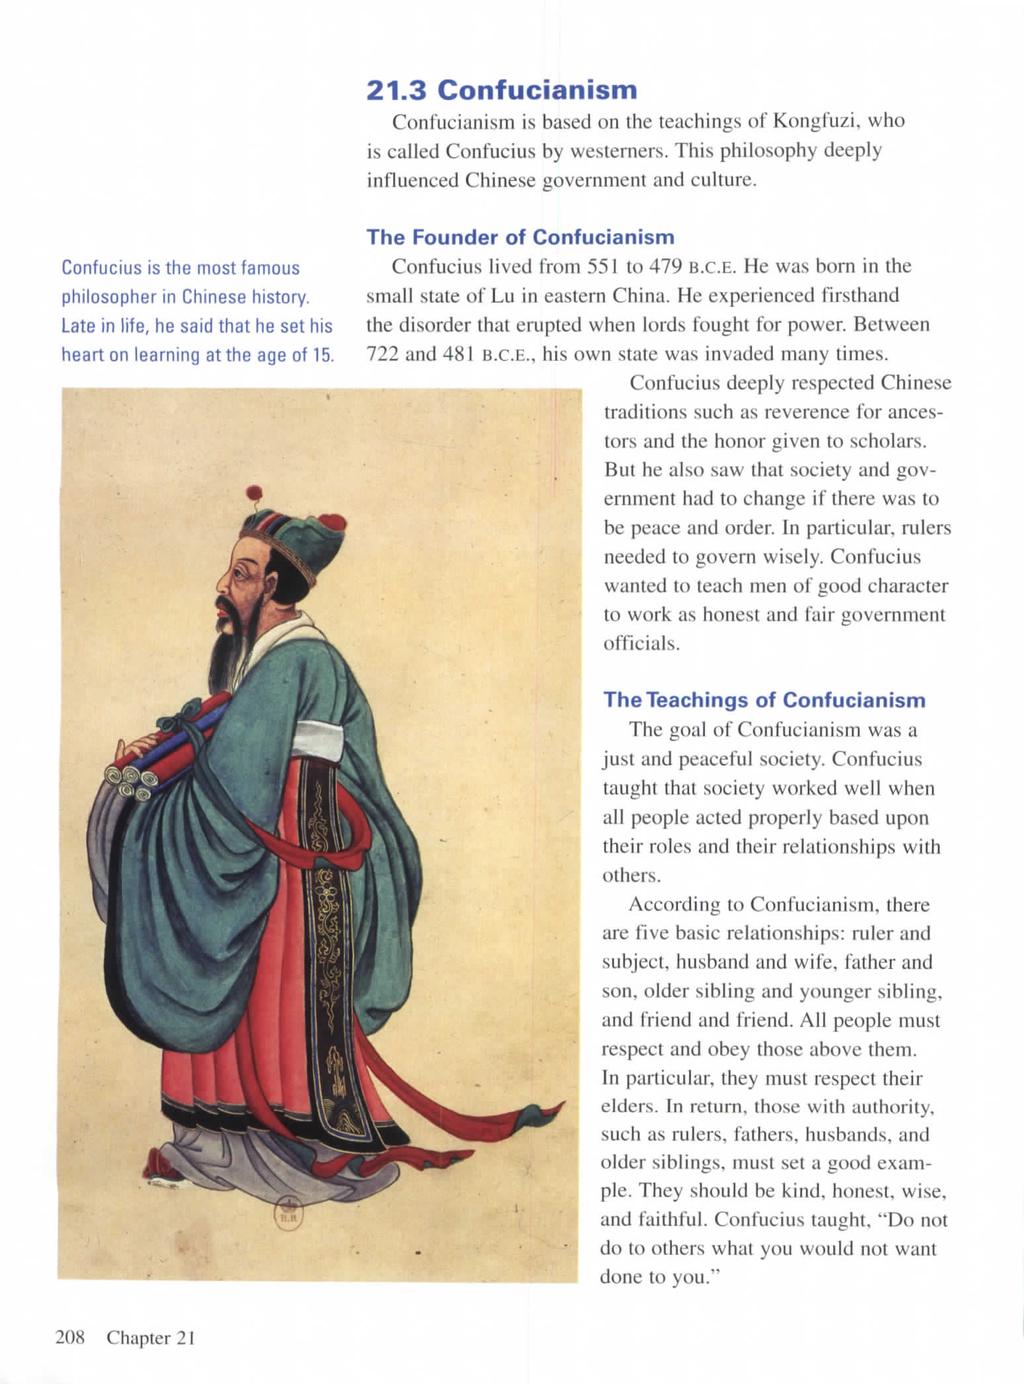 21.3 Confucianism Confucianism is based on the teachings of Kongfuzi. who is called Confucius by westerners. This philosophy deeply influenced Chinese government and culture.